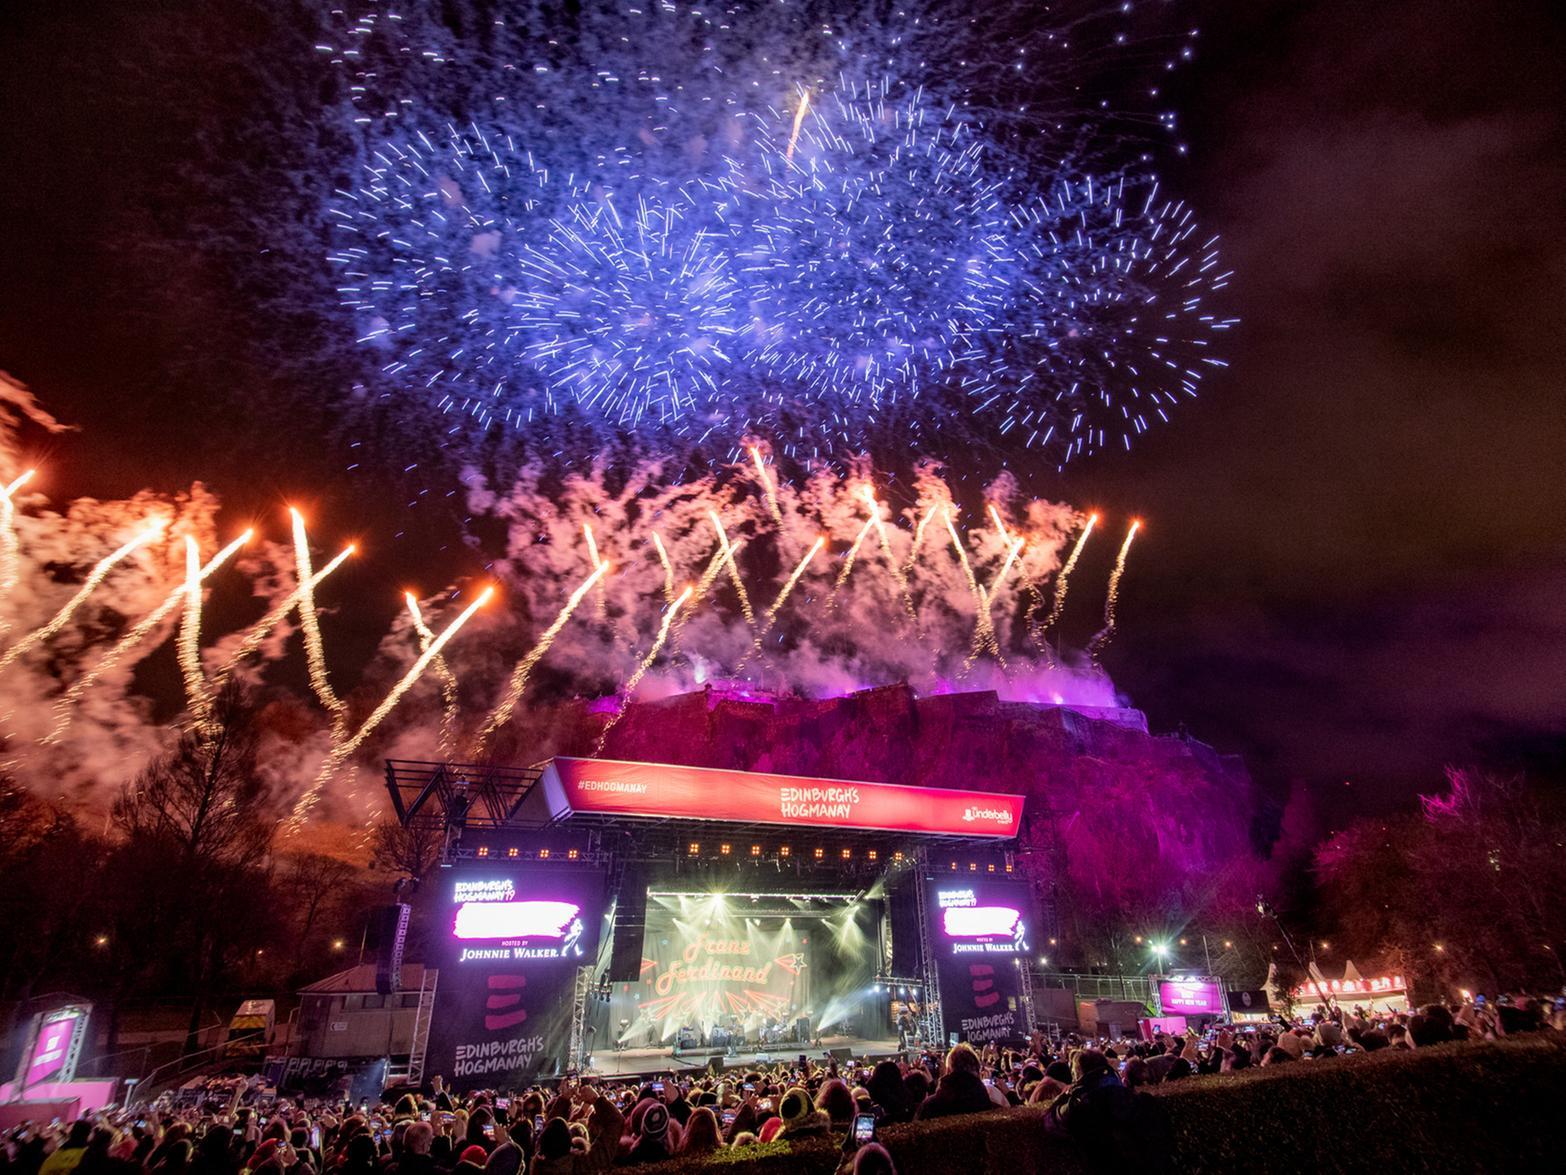 Edinburgh's Christmas and Hogmanay events in doubt over